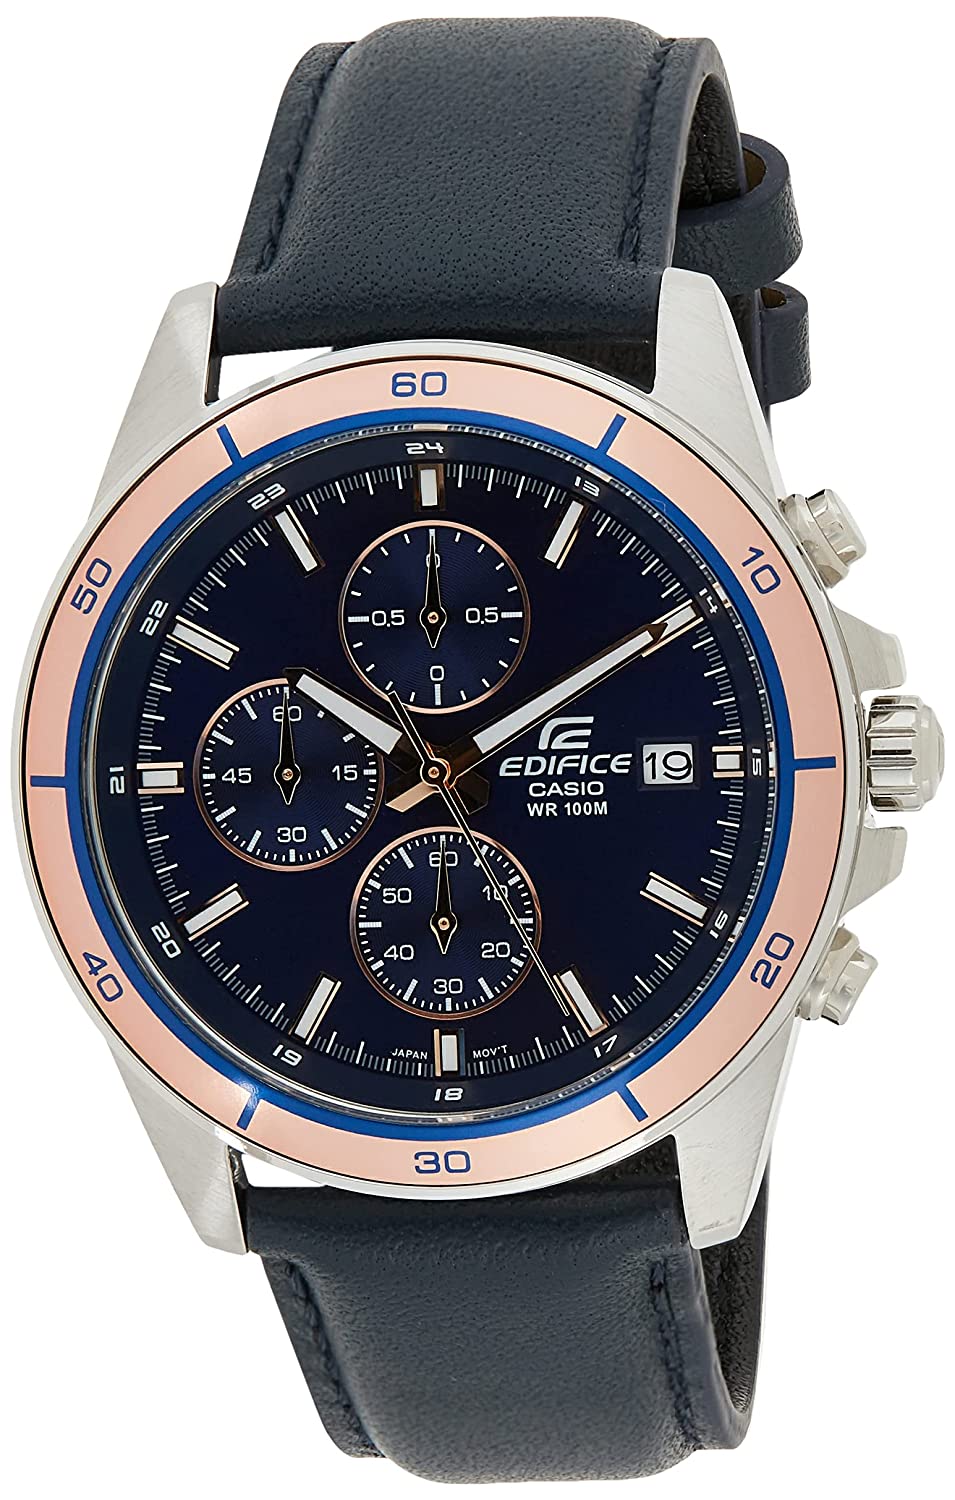 Casio Chronograph Watch EFR-526 L-2 AVUDF  | Leather Band | Water-Resistant | Quartz Movement | Classic Style | Fashionable | Durable | Affordable | Halabh.com